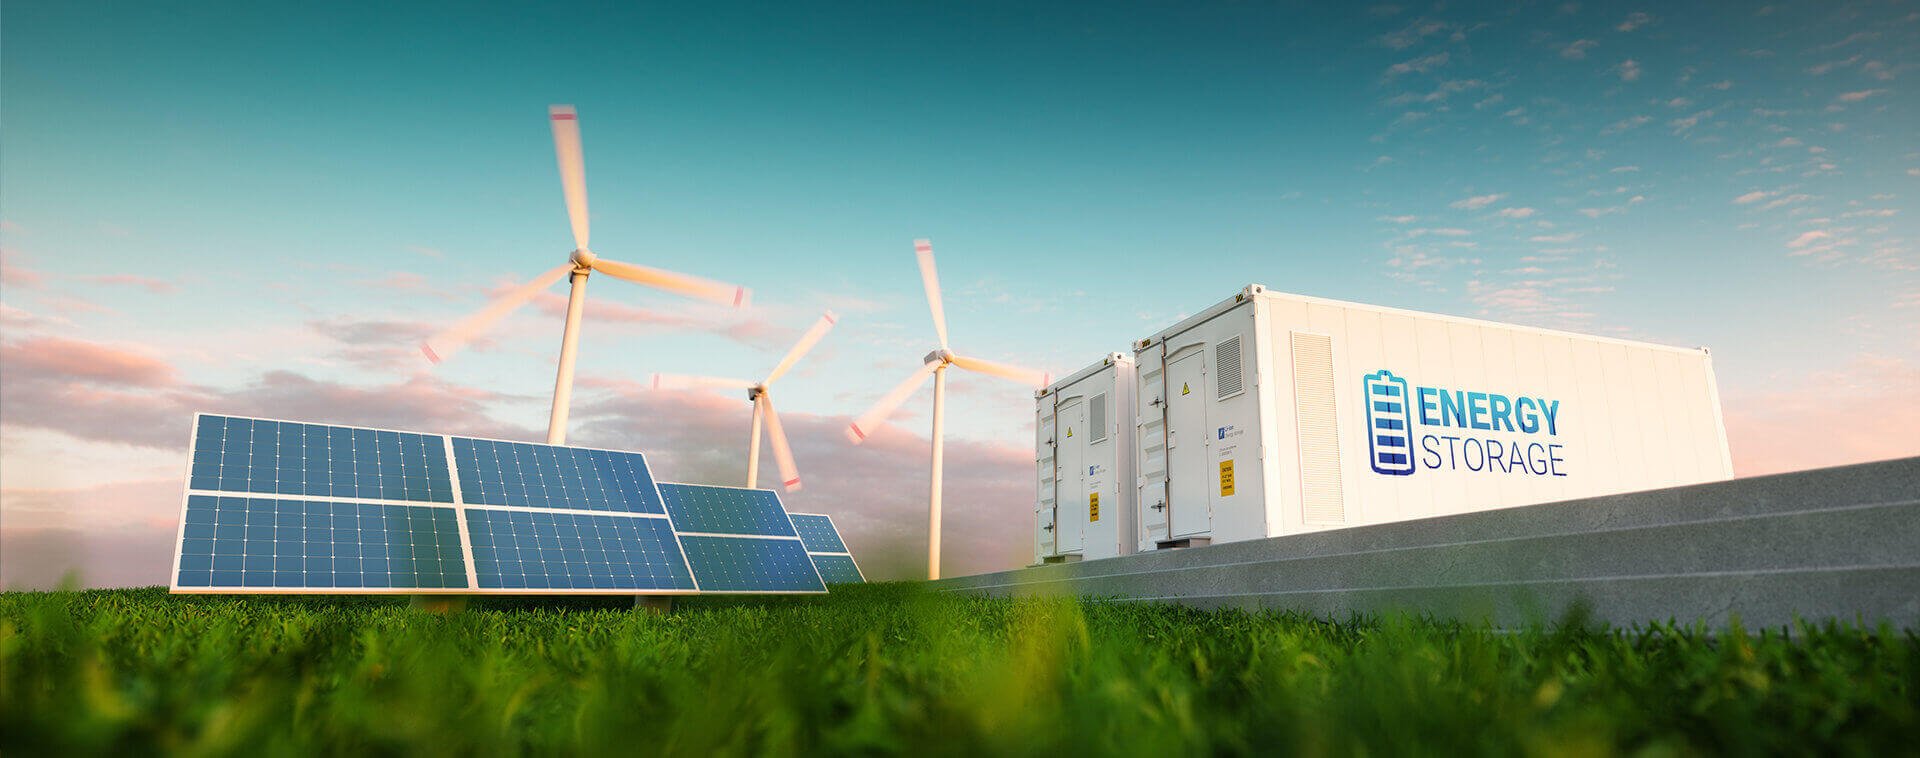   Clean Energy Marketing   Introducing specialized marketing programs tailored to revolutionize global energy storage applications, solar, wind, hybrid, RE and hydrogen fuels.   LEARN MORE  